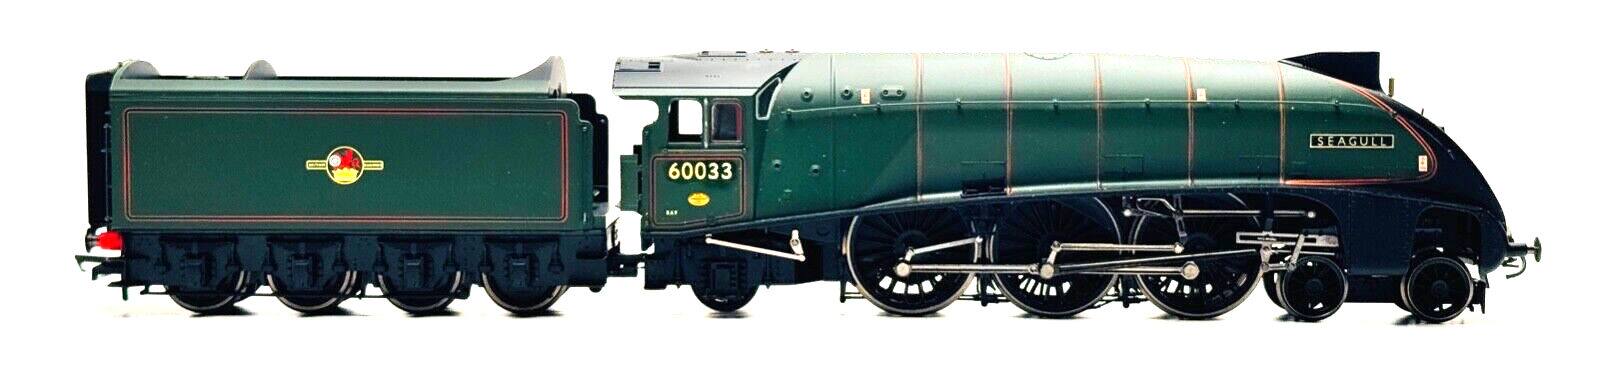 HORNBY 00 GAUGE - R2535 - BR GREEN 4-6-2 CLASS A4 SEAGULL 60033 (RENAMED) BOXED